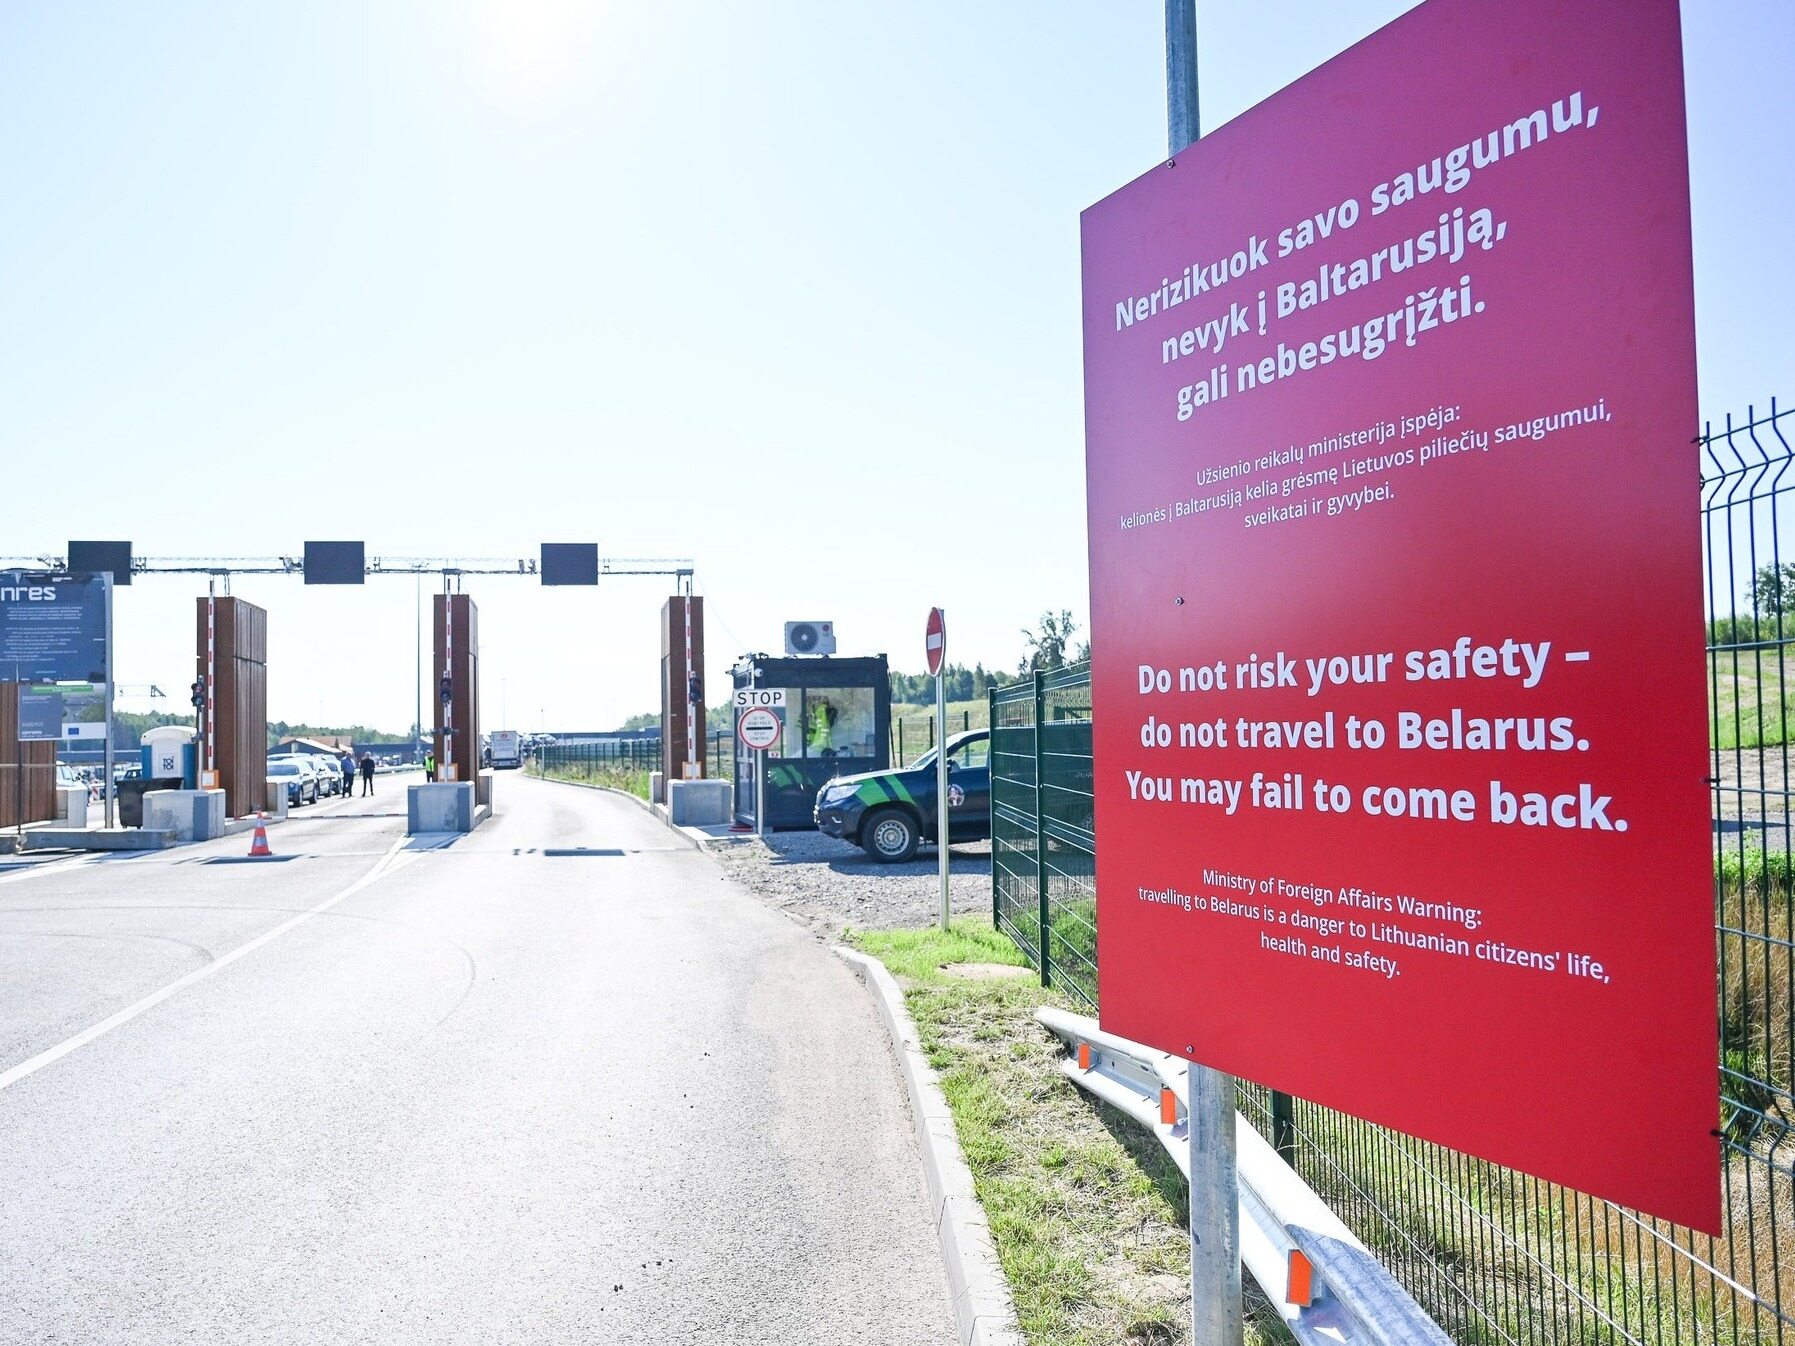 A disturbing message on the Lithuanian border.  “Do not travel to Belarus.  You may not come back"